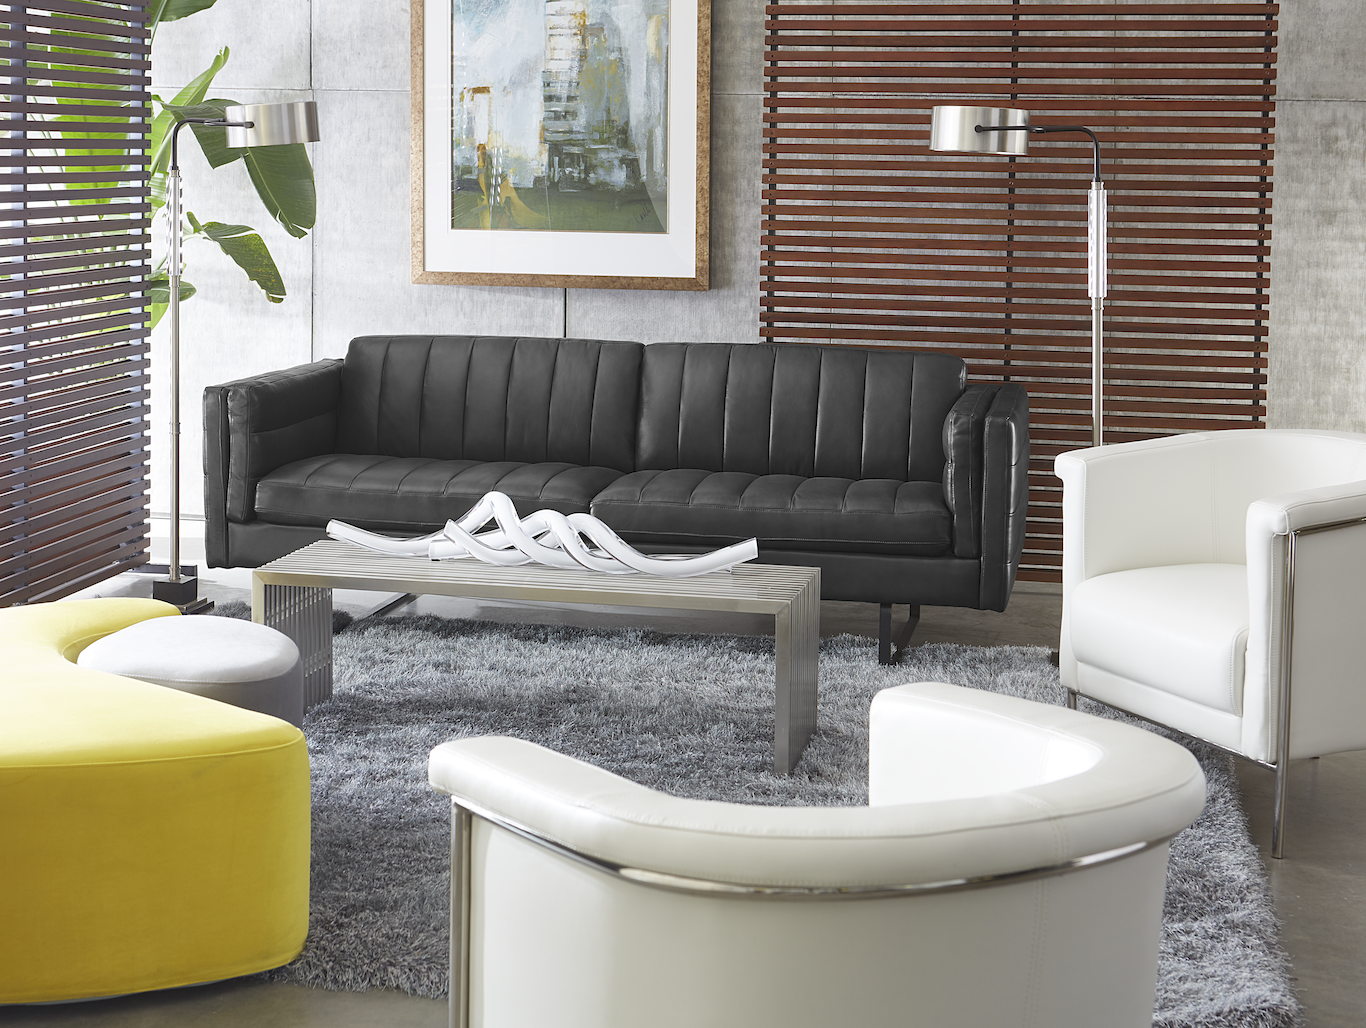 Lagom interior design with black couch, white chair and rug